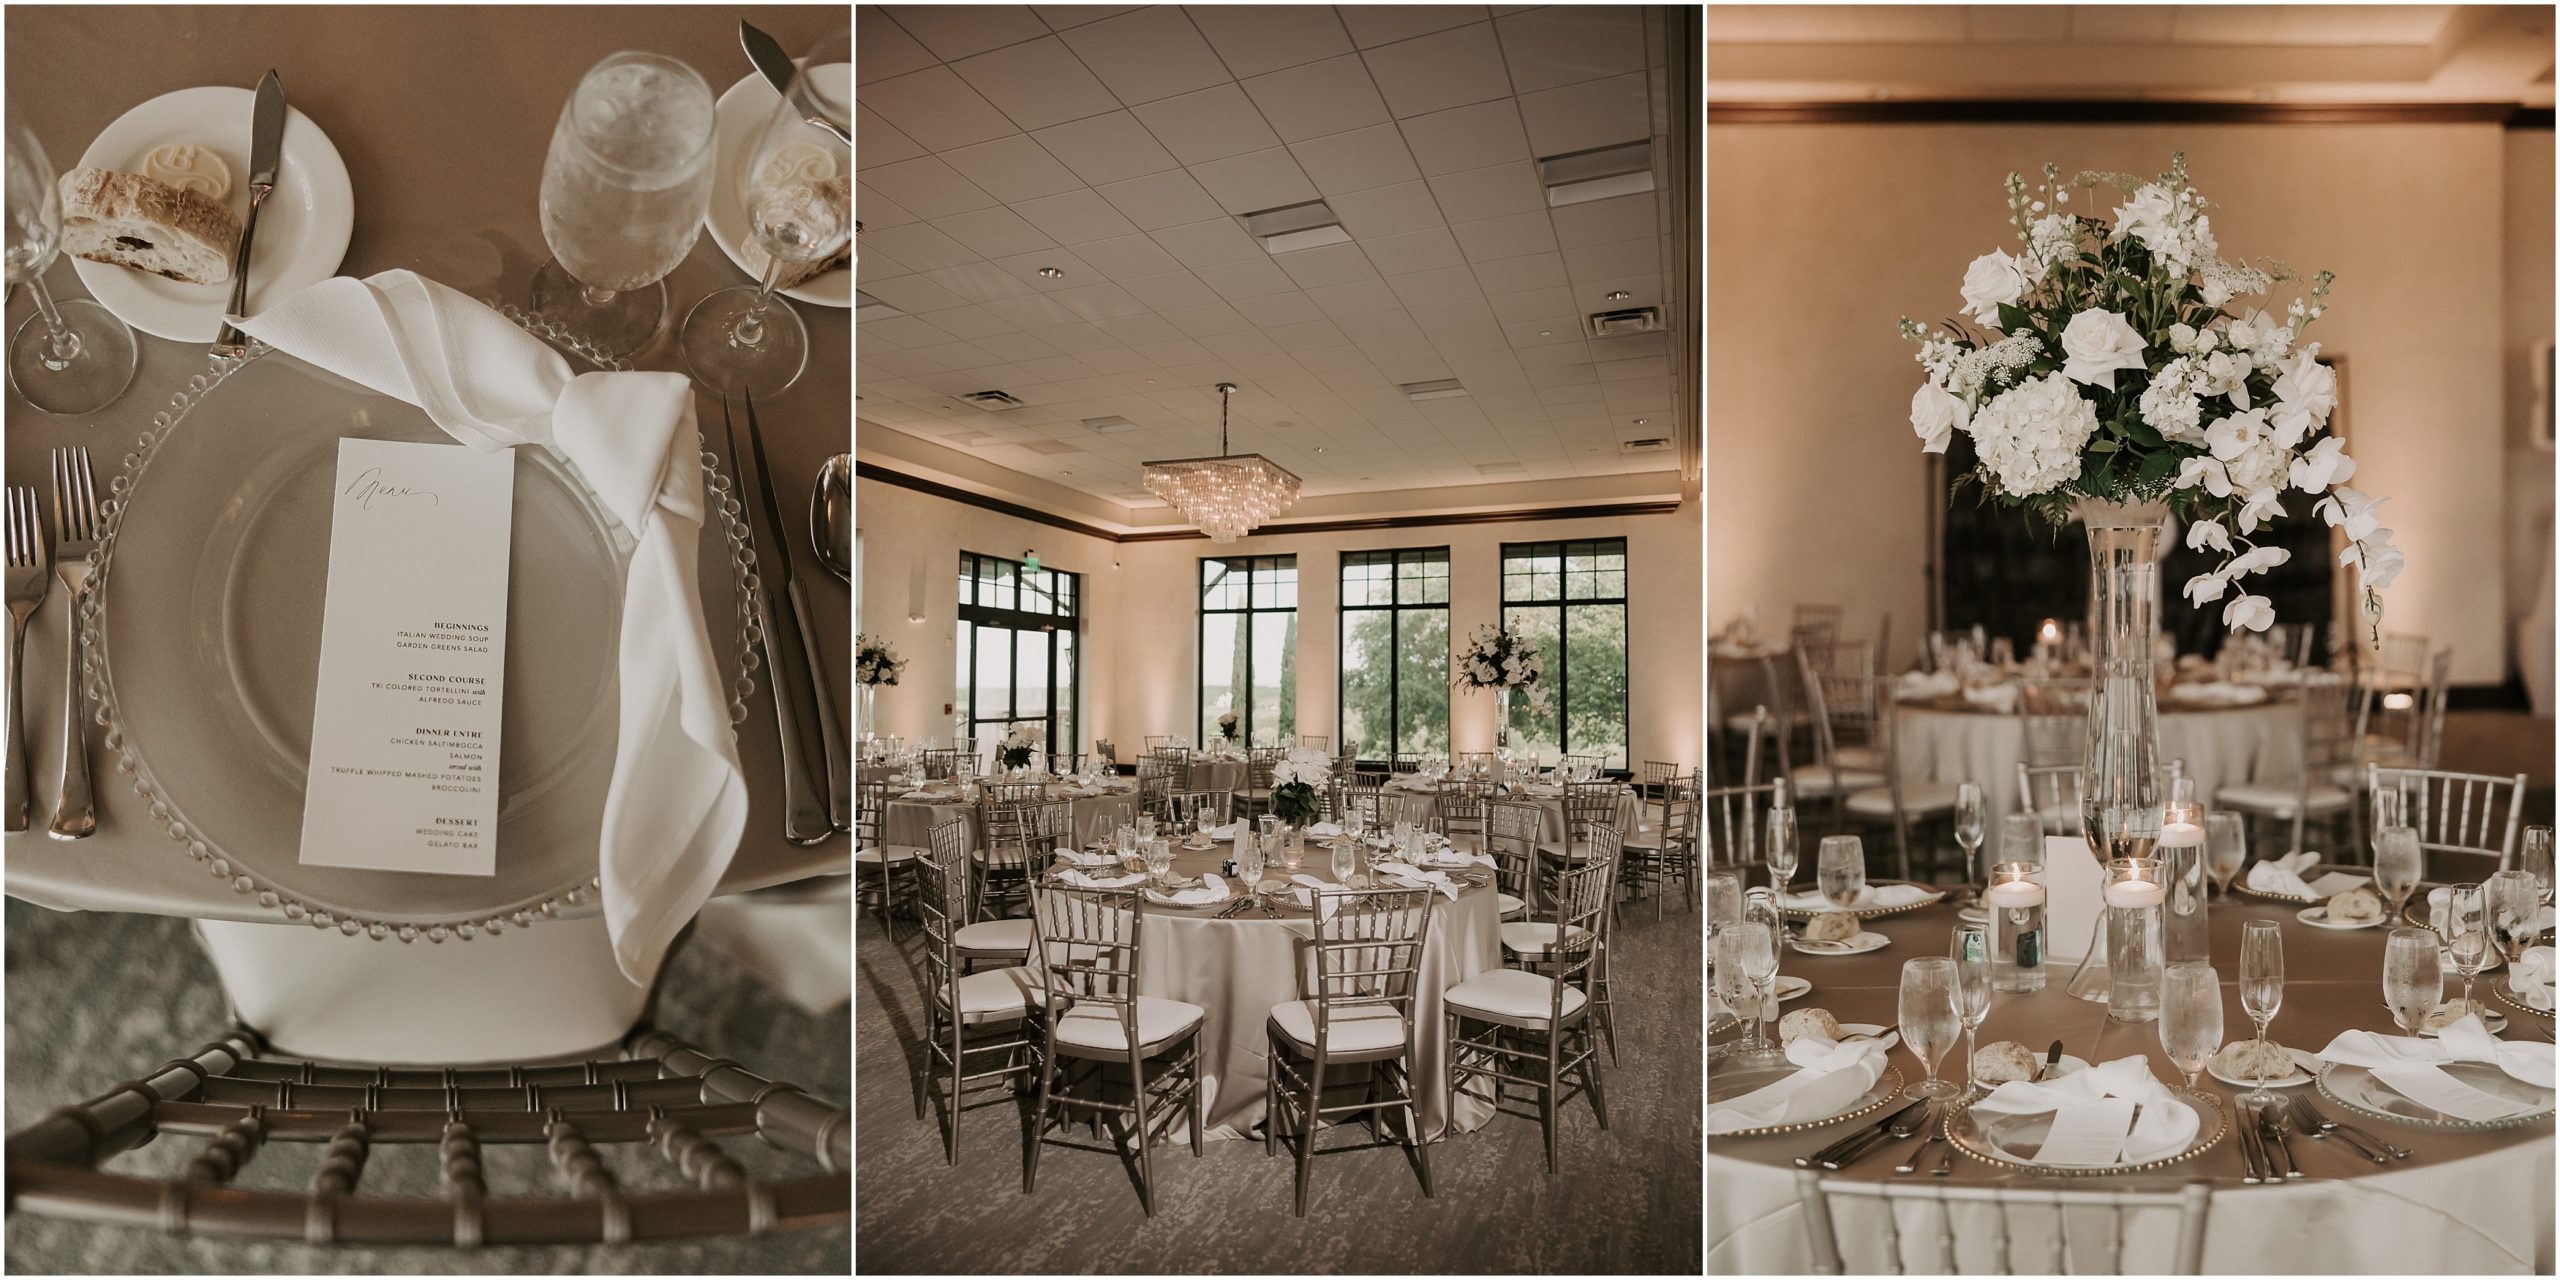 The couple chose mainly white and green florals, white napkins, taupe tablecloths, a varying levels of glass pillar candles besides silver silverware to complete the elegant and timeless wedding design.